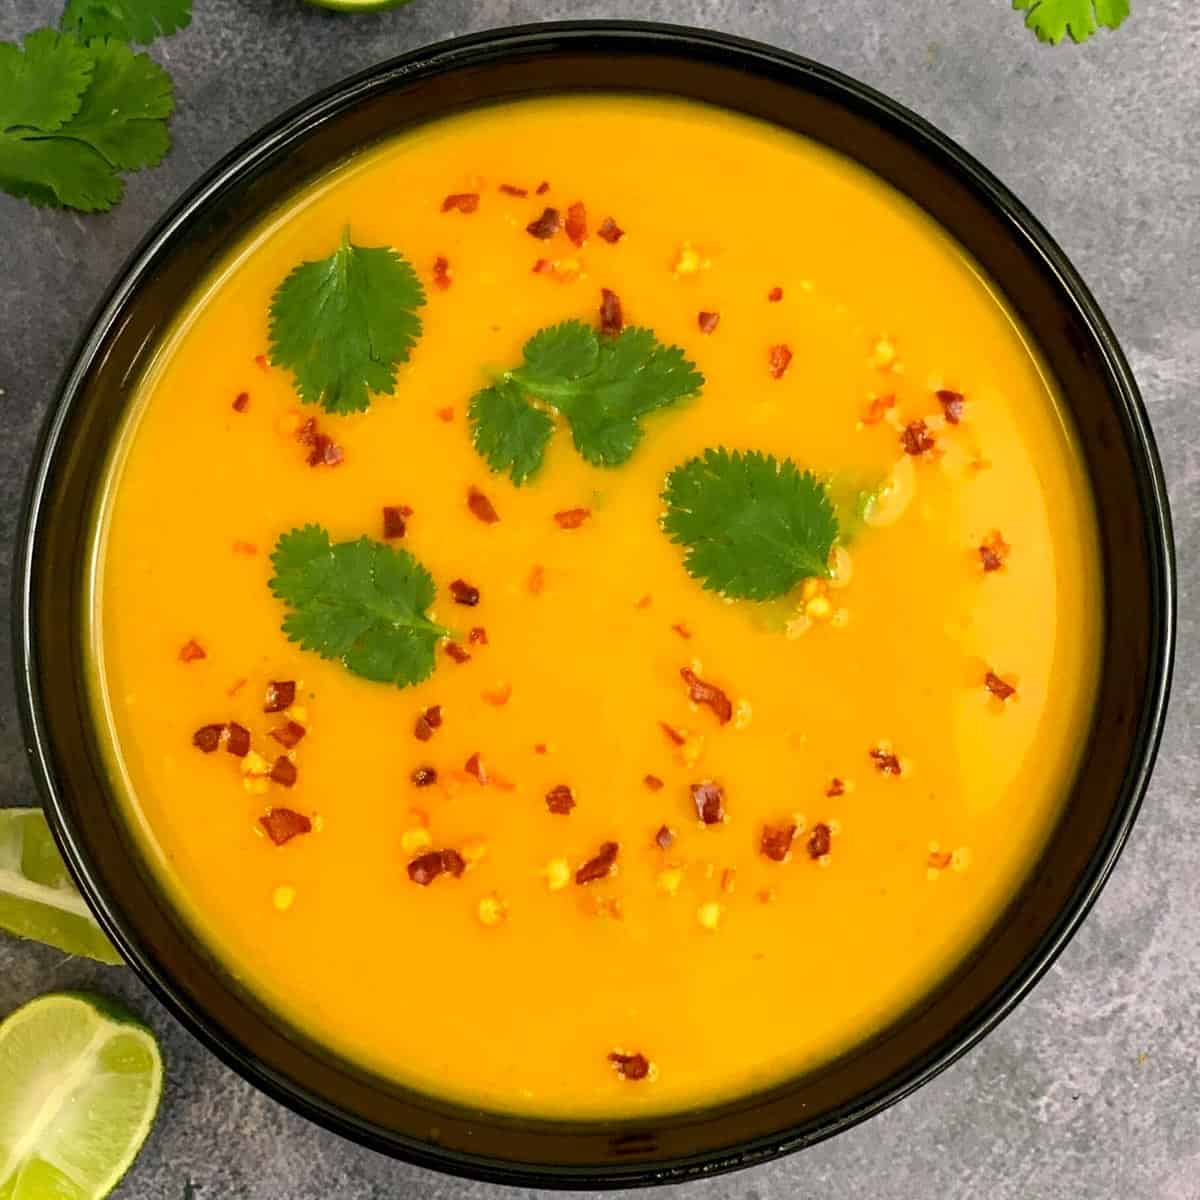 Thai Curried Pumpkin Soup served in a soup bowl garnished with red chilli flakes and cilantro